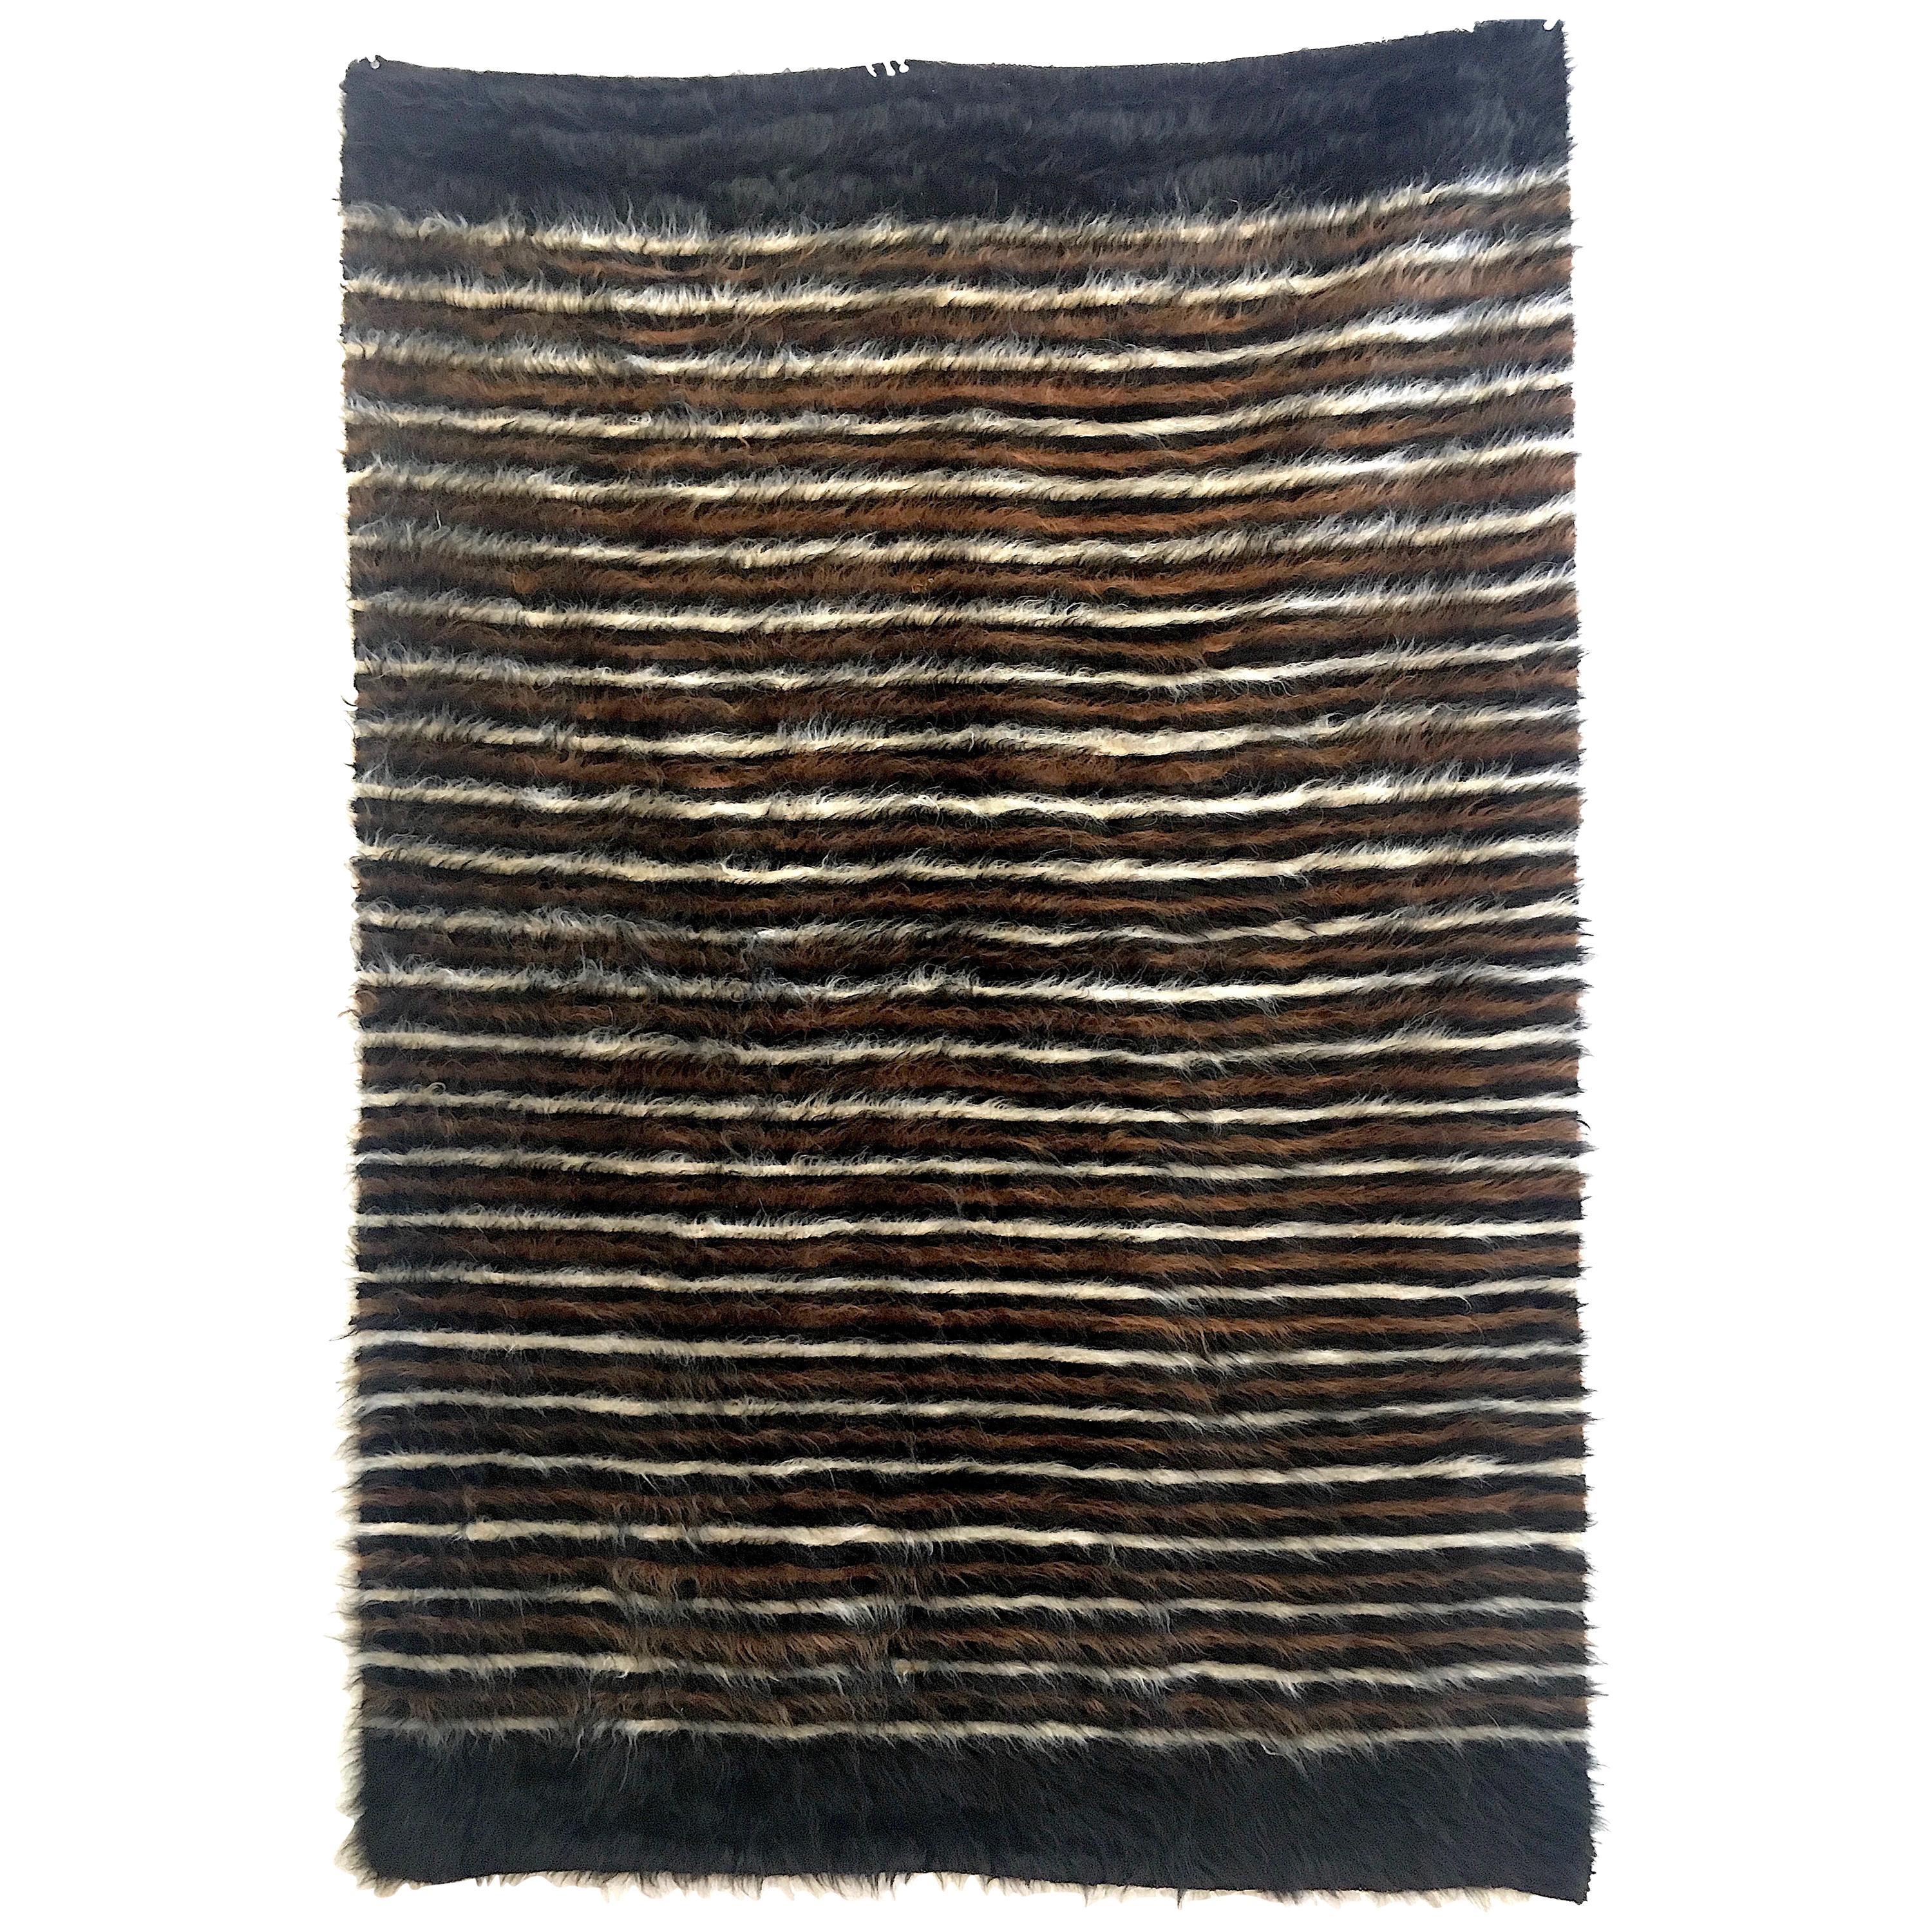 Mid-Century Modern Goat Hair Rug with Stripes ‘Narrow with Black Ends’ For Sale